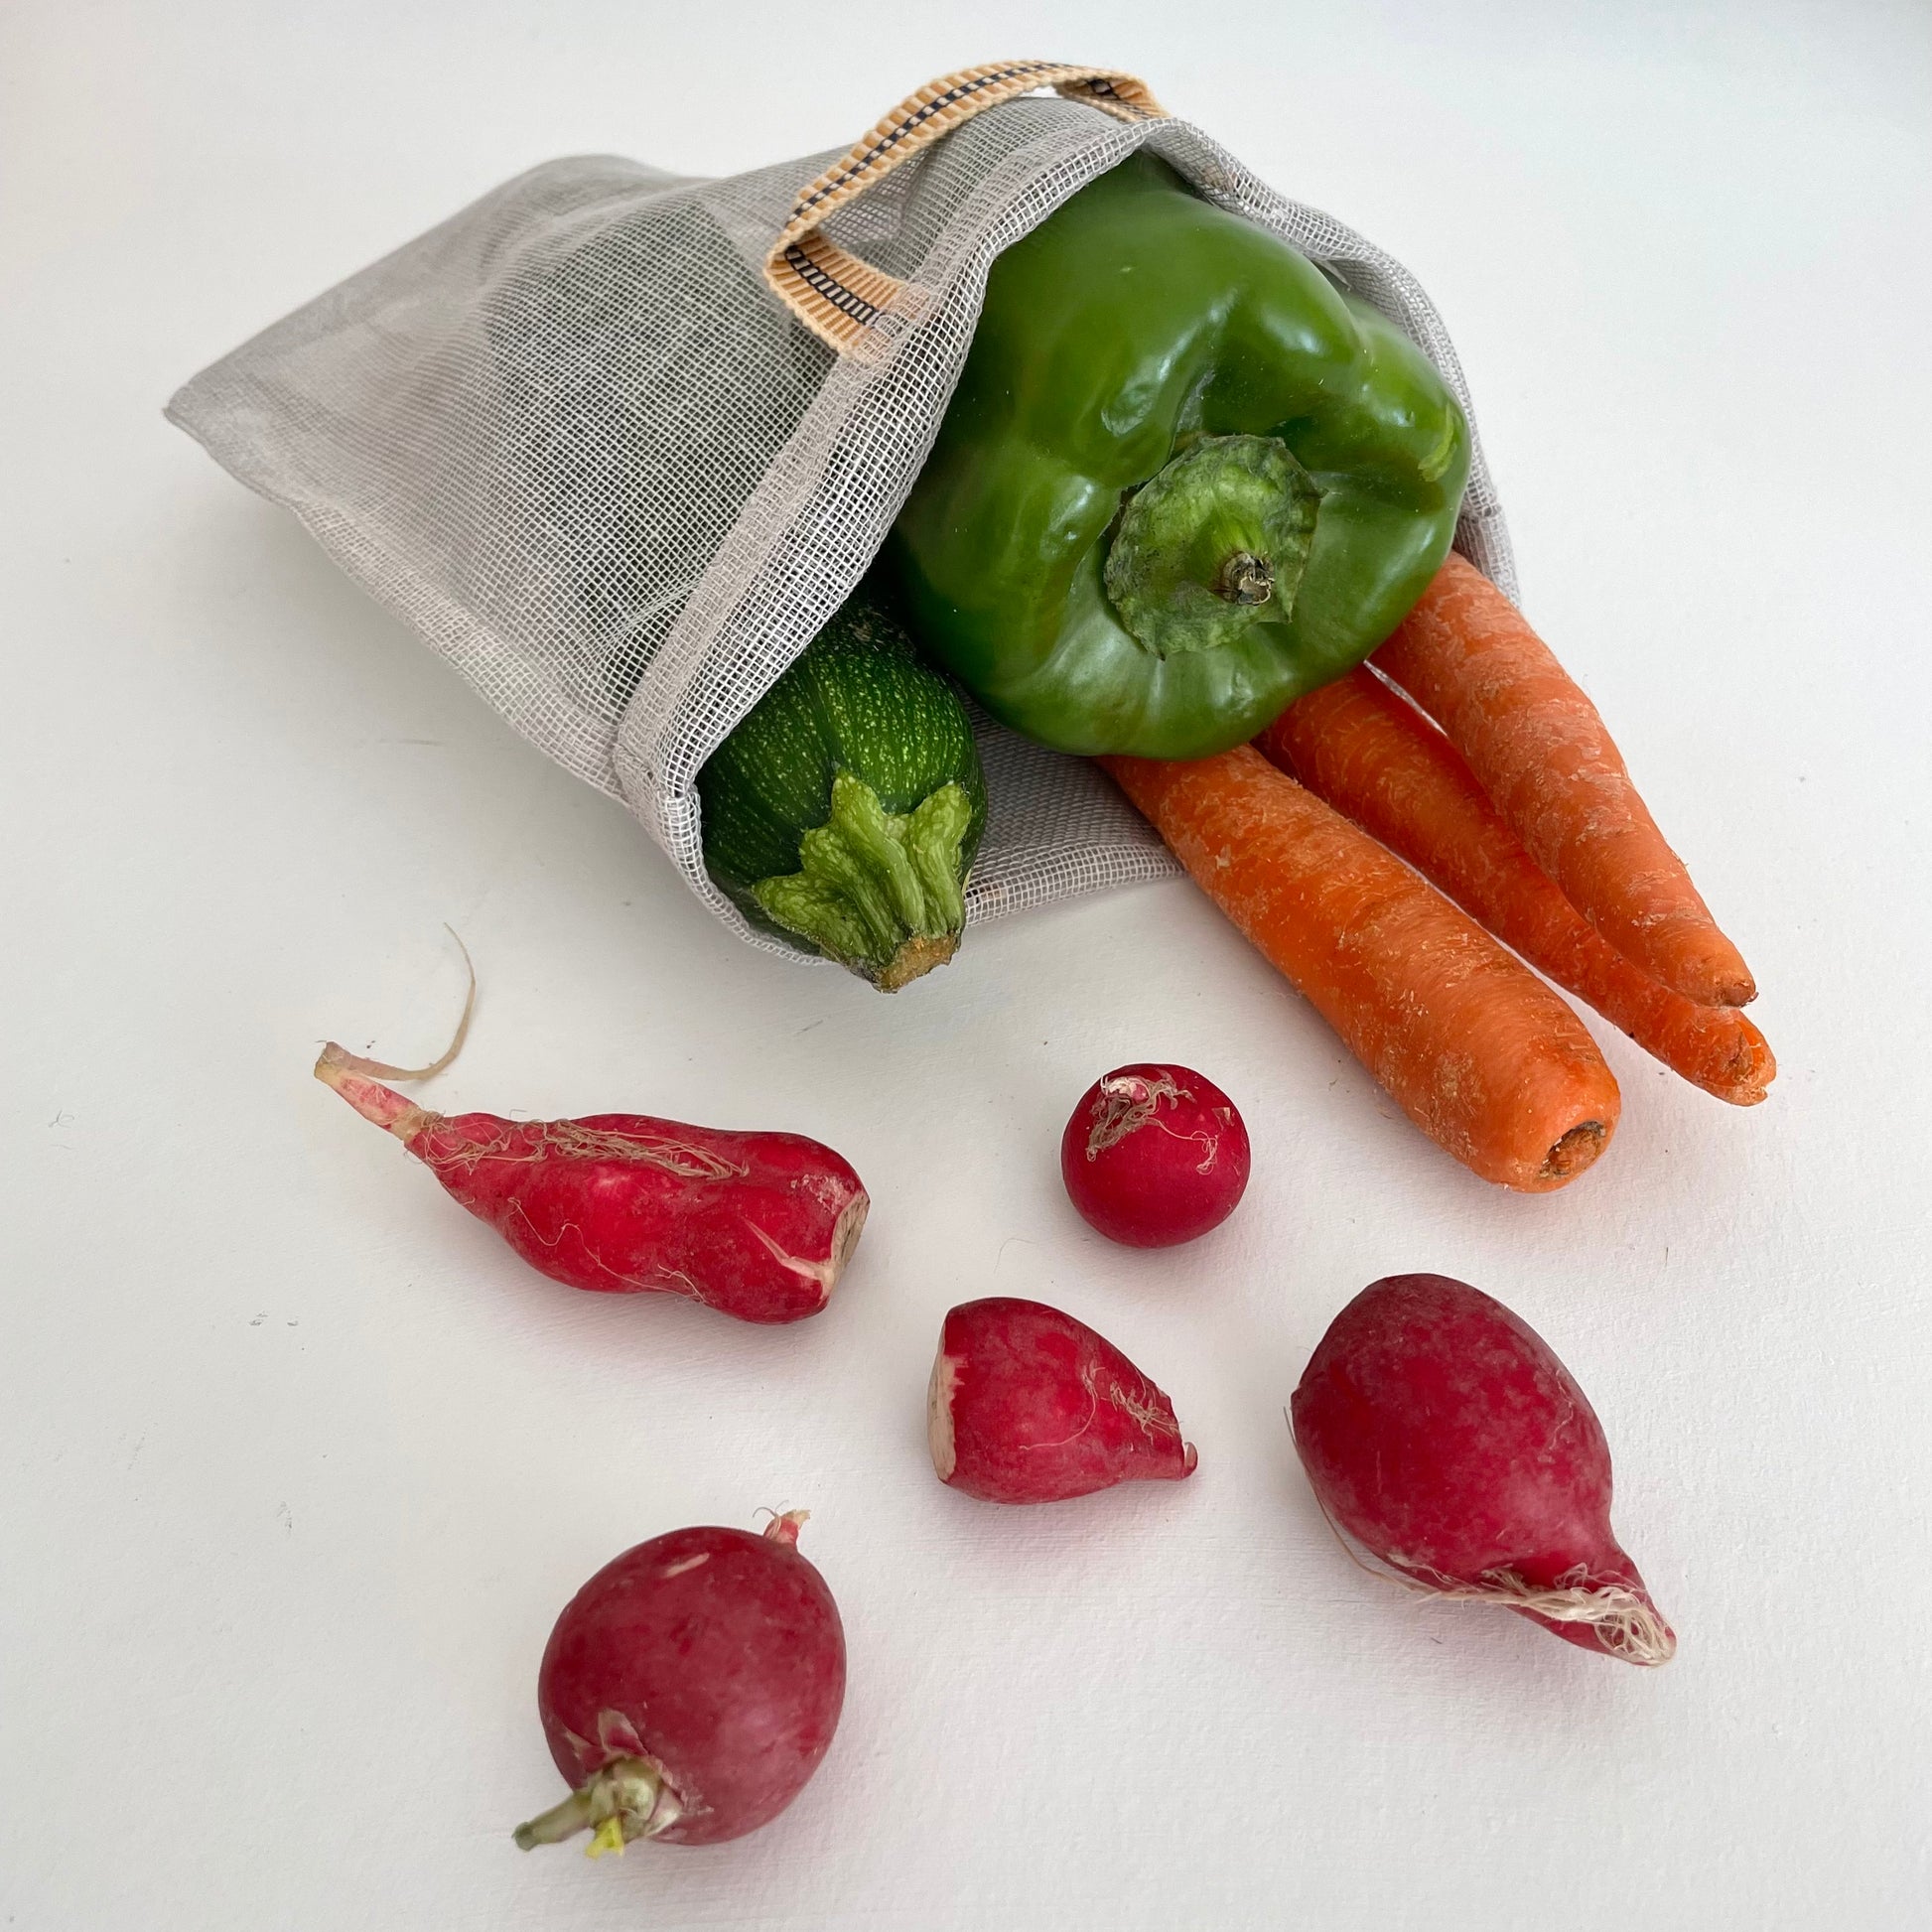 grey 100 percent cotton mesh mosquito net eco produce bags with peppers carrots and radishes